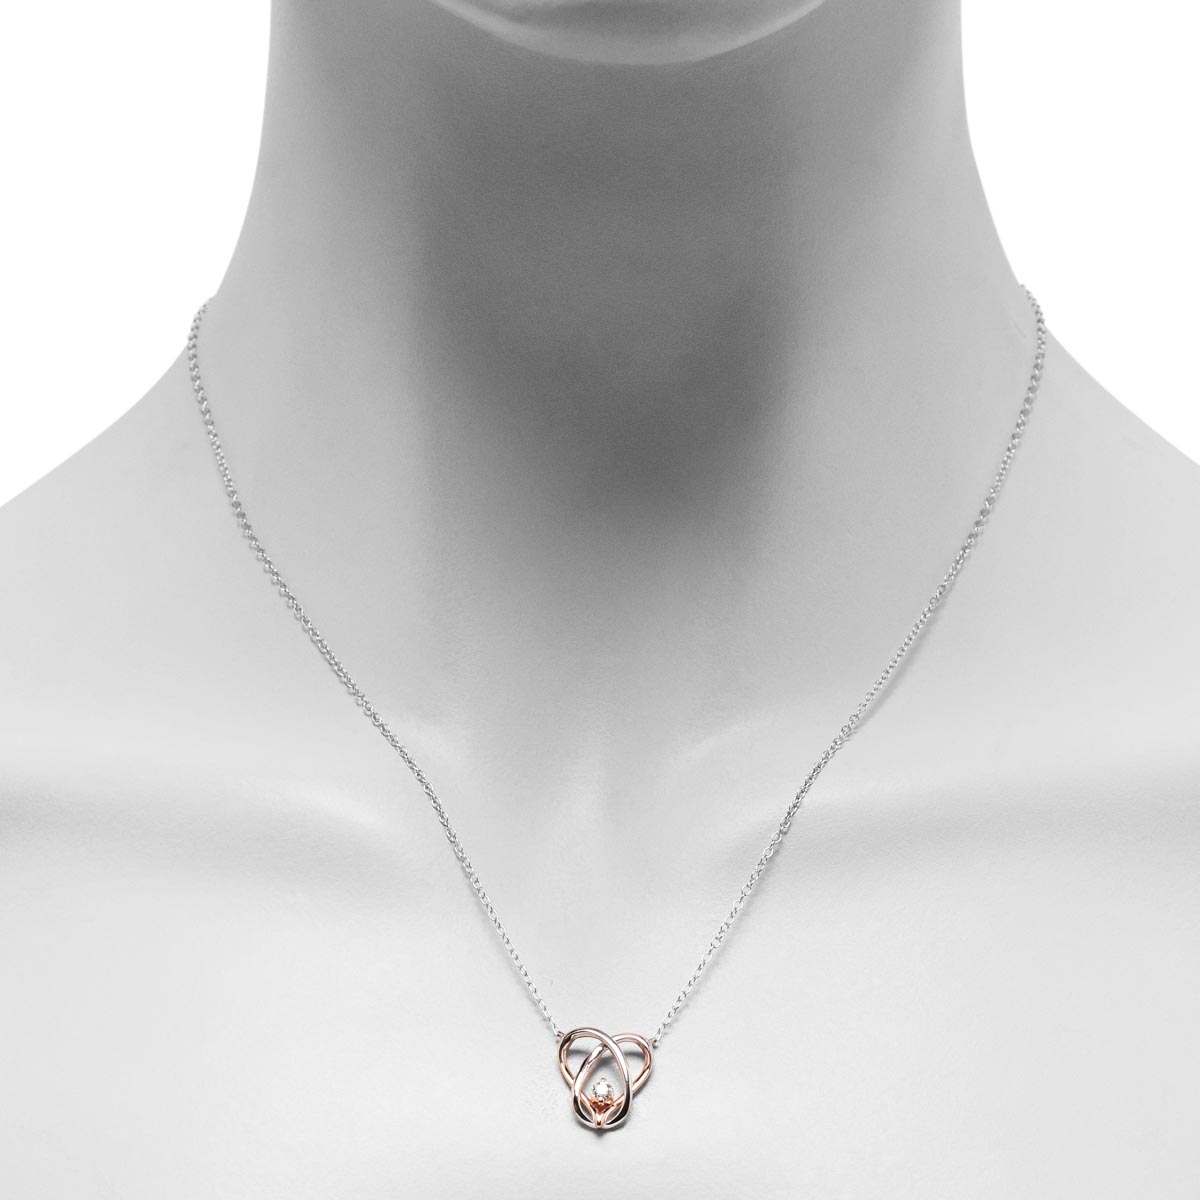 Northern Star Diamond Love Knot Collection Necklace in Sterling Silver and 10kt Rose Gold (1/10ct)